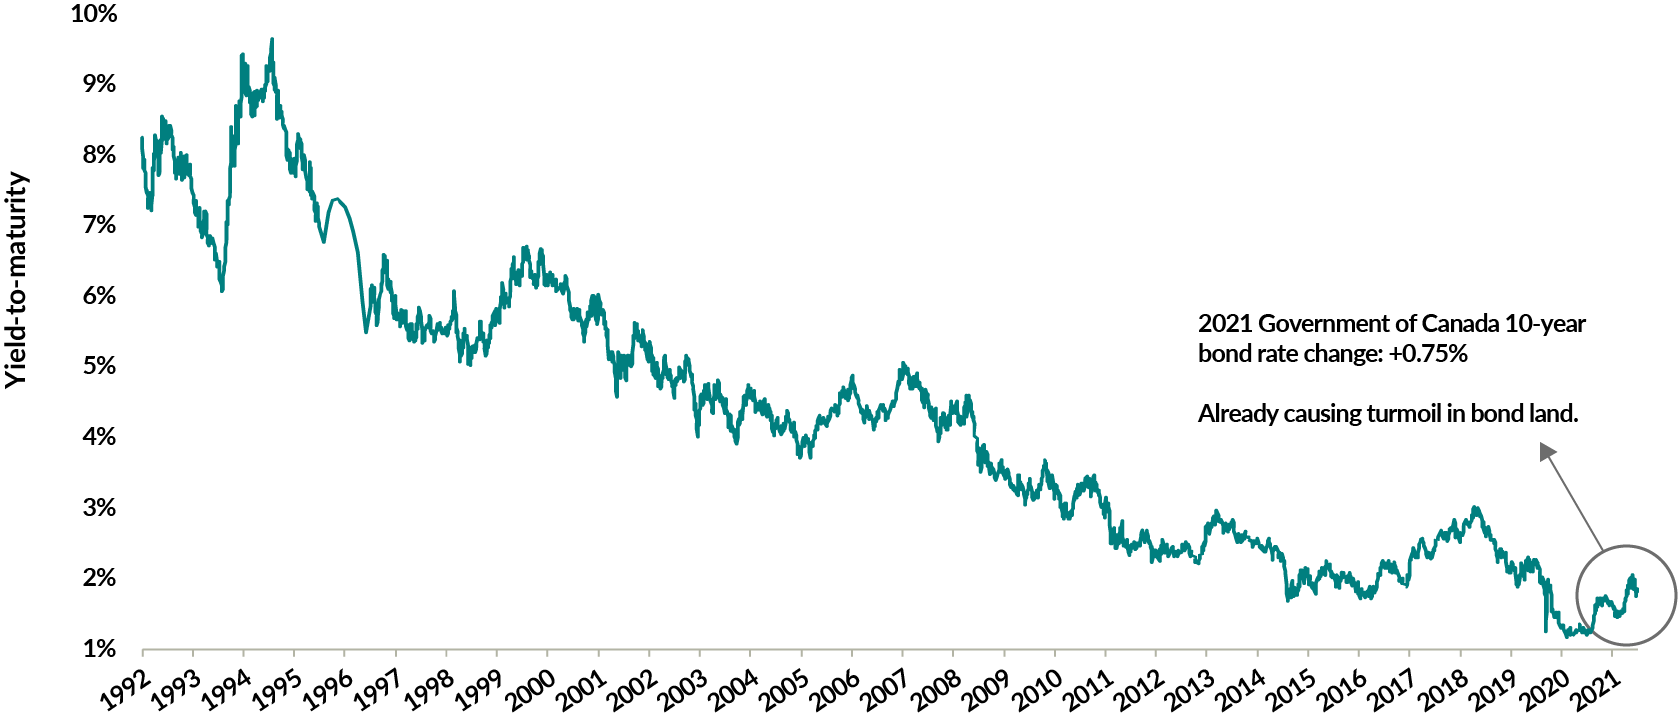 A chart showing the yield-to-maturity of the ICE BofA Canada Broad Market Index from June 30, 1992 to December 31, 2021. It started over 8%, almost reached 10% in the mid-1990s, then fell to under 1.80% by the end of 2021. From the start of 2021 to the end of the year, the Government of Canada's 10-year bond rate rose 0.75%, partially causing the yield-to-maturity to rise from 1.20% to 1.84%.